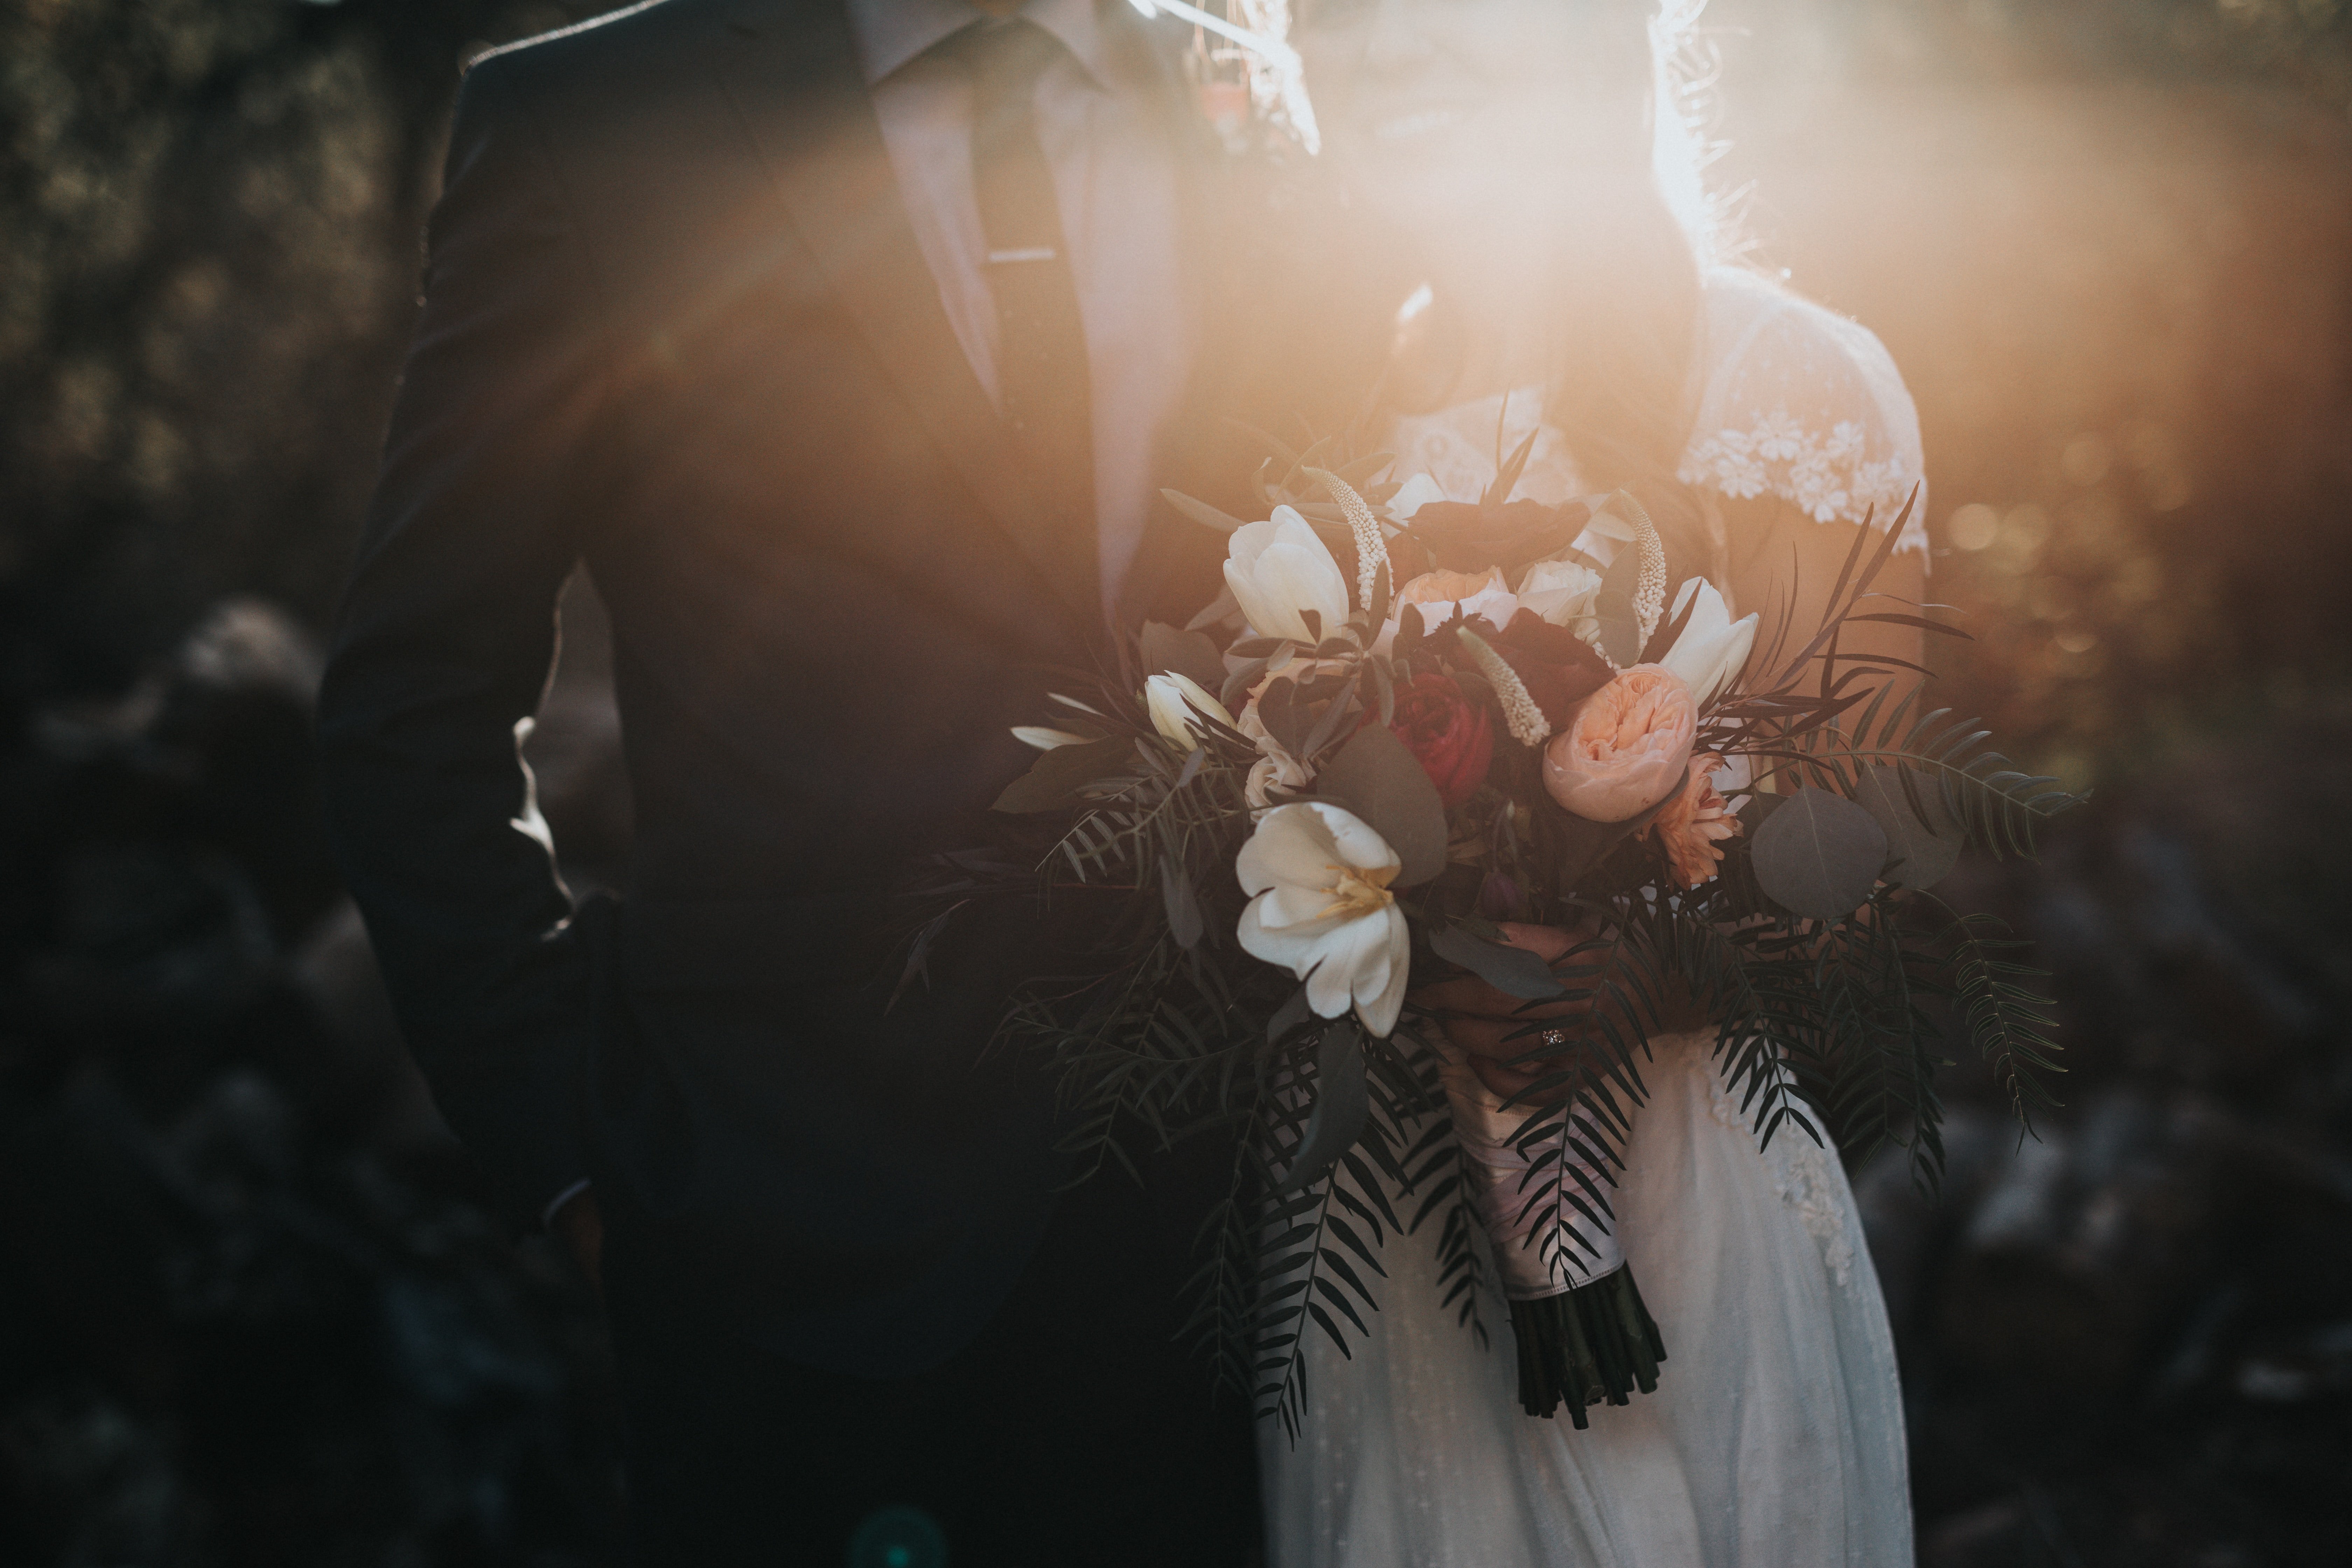 A couple on their wedding day | Source: Unsplash